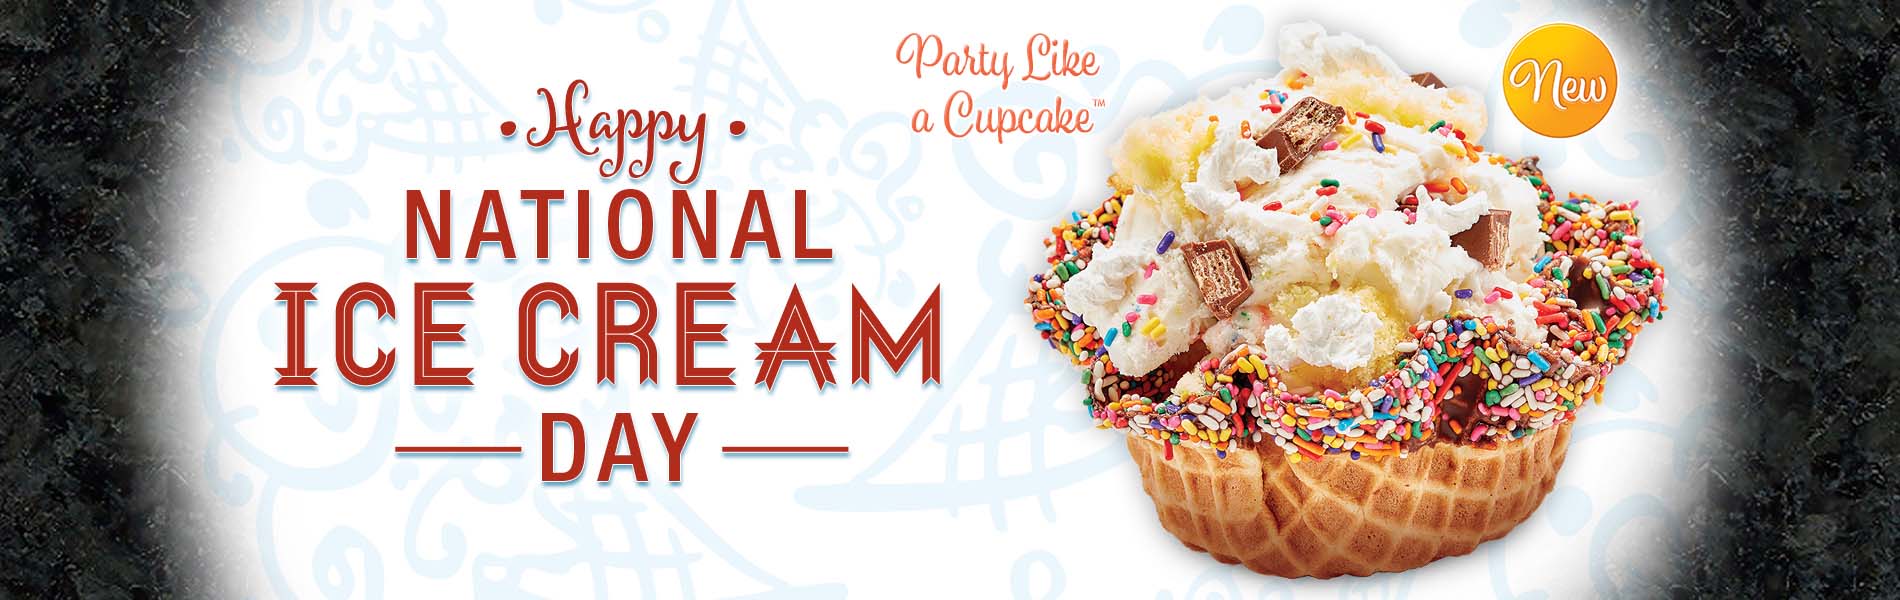 Cold Stone Creamery Celebrates National Ice Cream Day With Bogo Deal